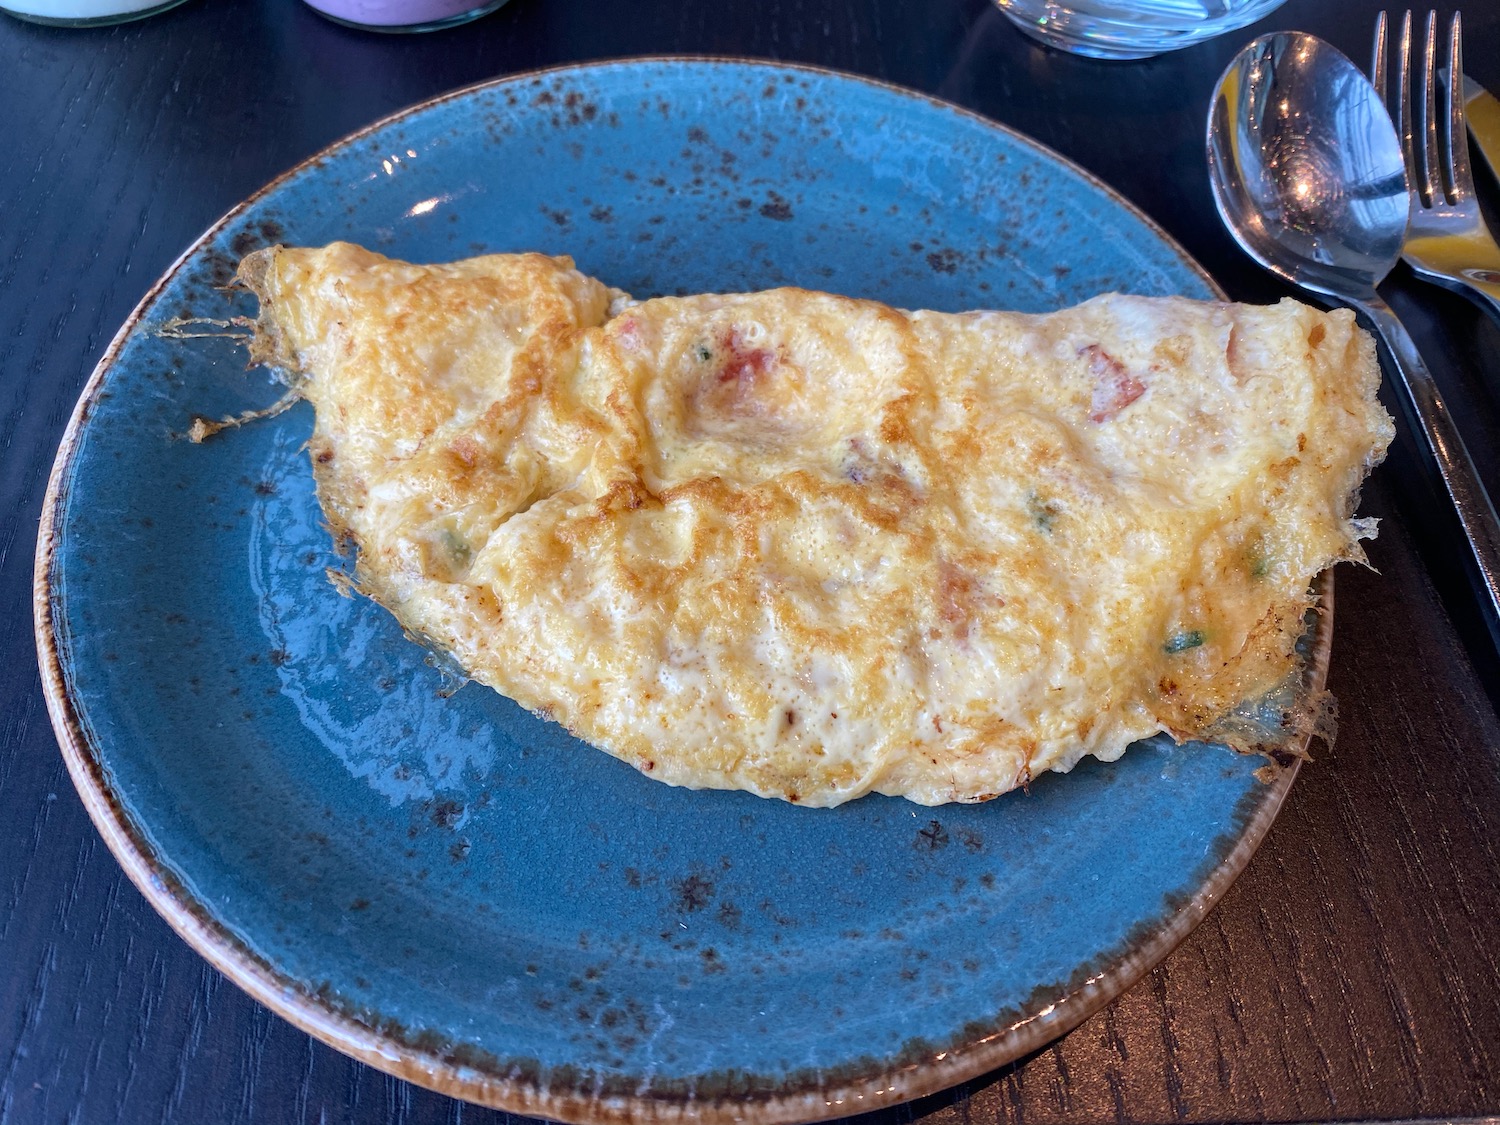 a omelette on a blue plate